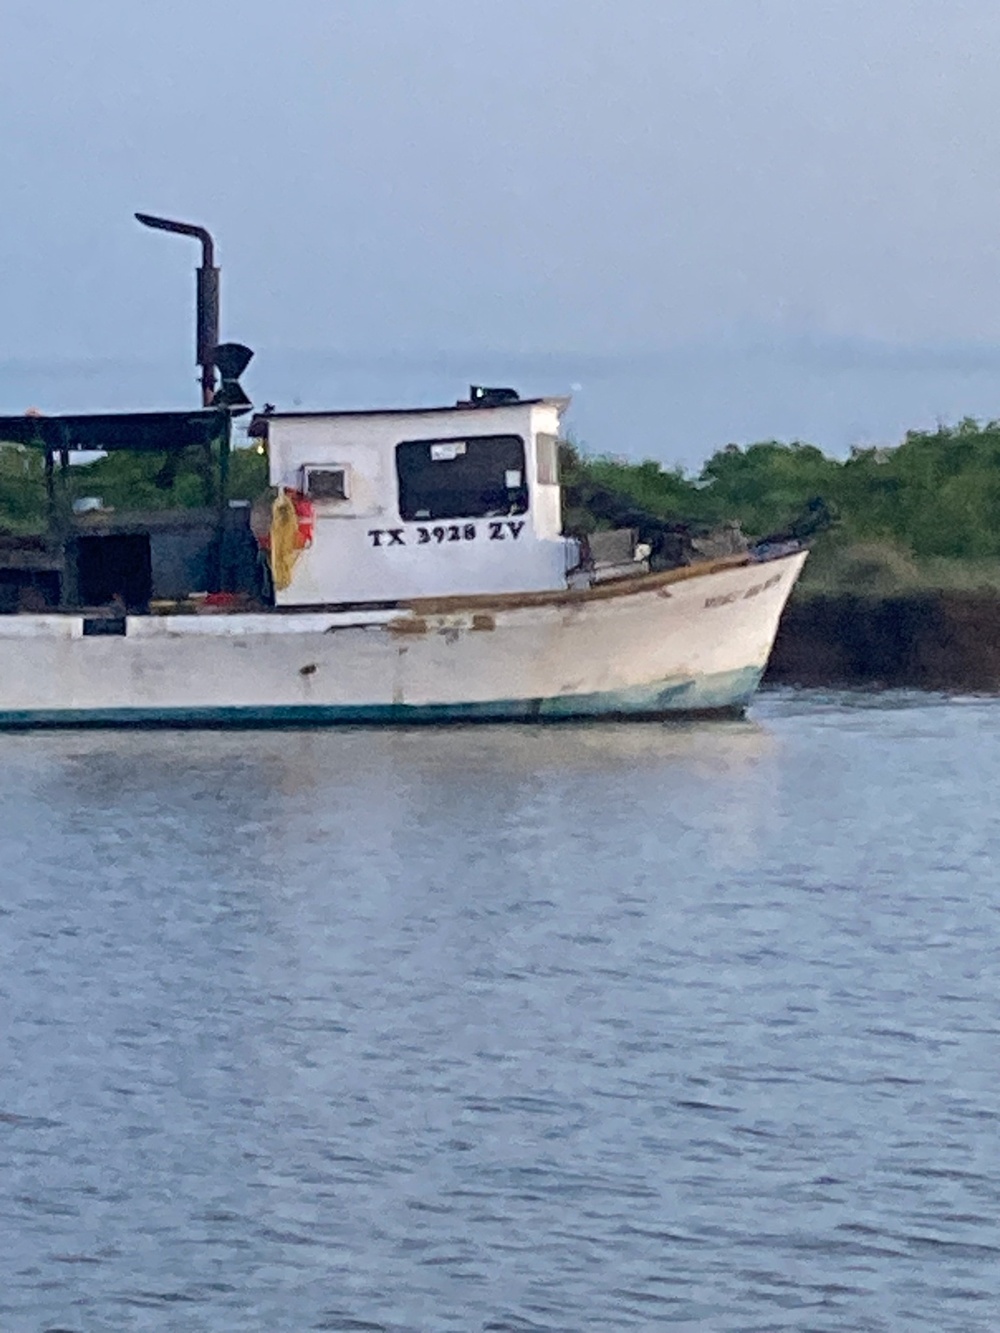 Coast Guard, good Samaritan rescue 3 from aground oyster boat near Sargent, Texas